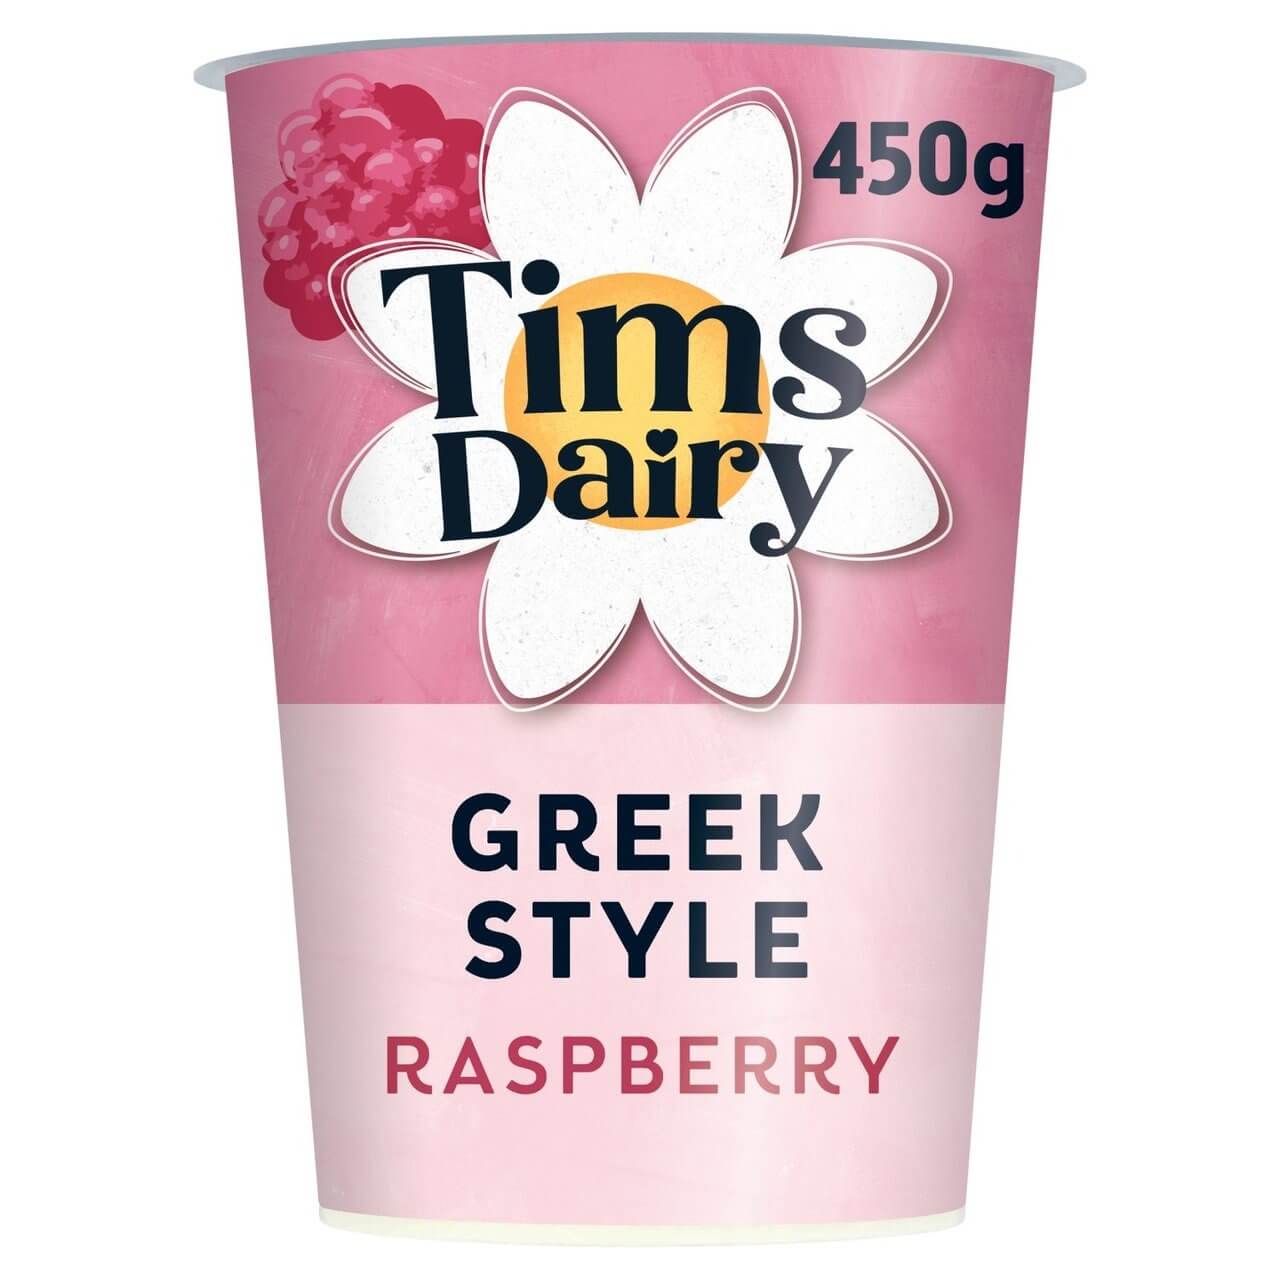 A glimpse of diverse products by Tim's Dairy, supporting the UK economy on YouK.